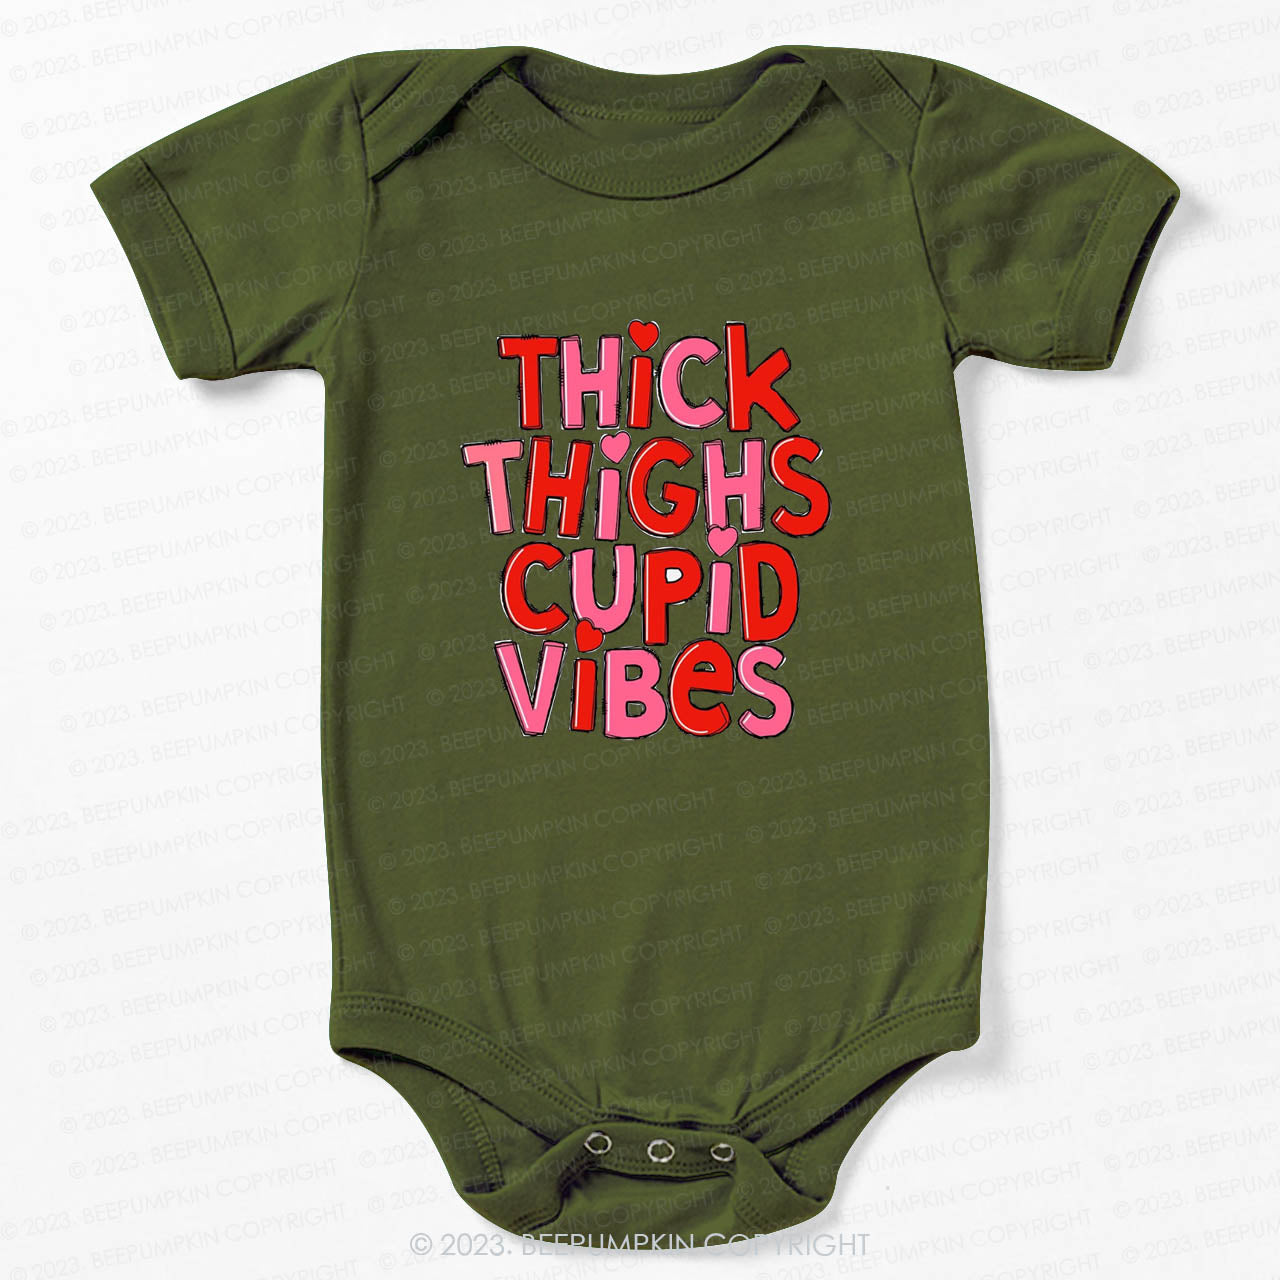 Thick Yhighs Cupid Vibes Bodysuit For Baby